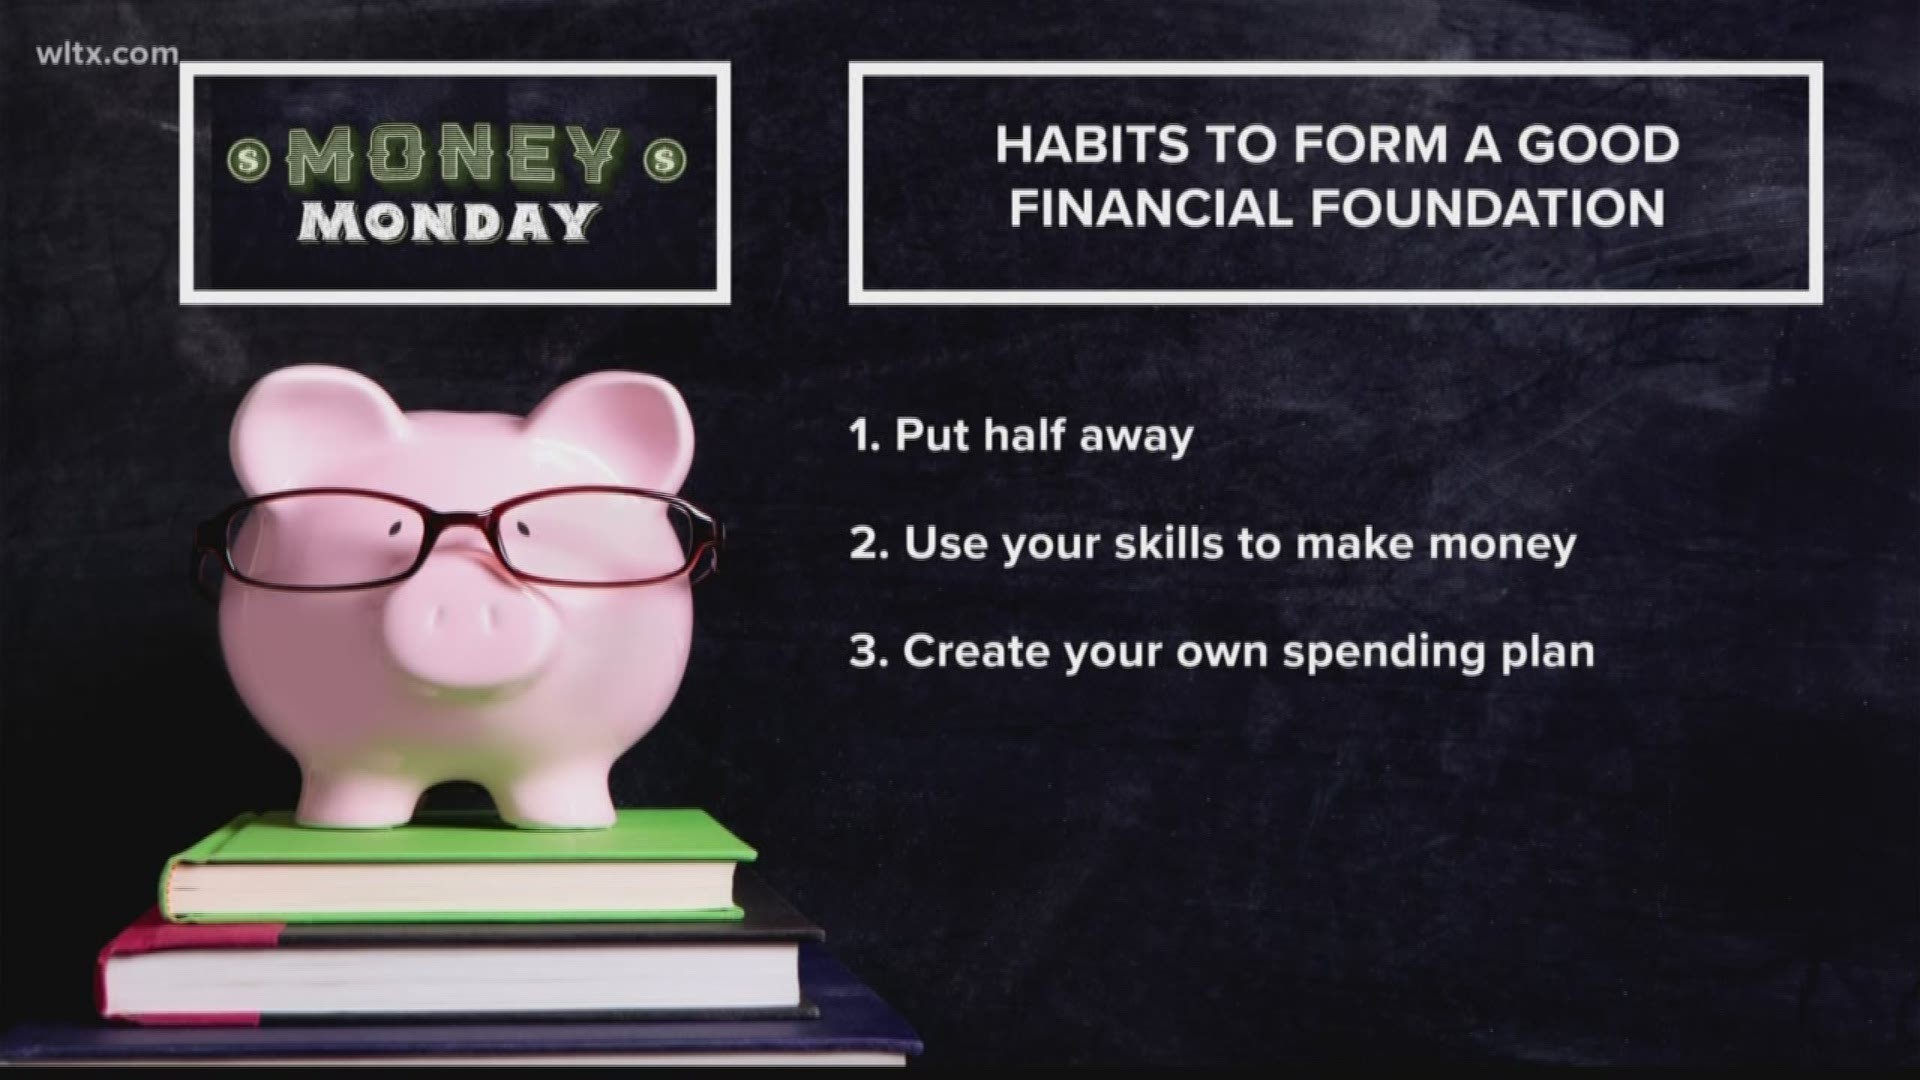 Steven Hughes provides three tips for high school students trying to save money.